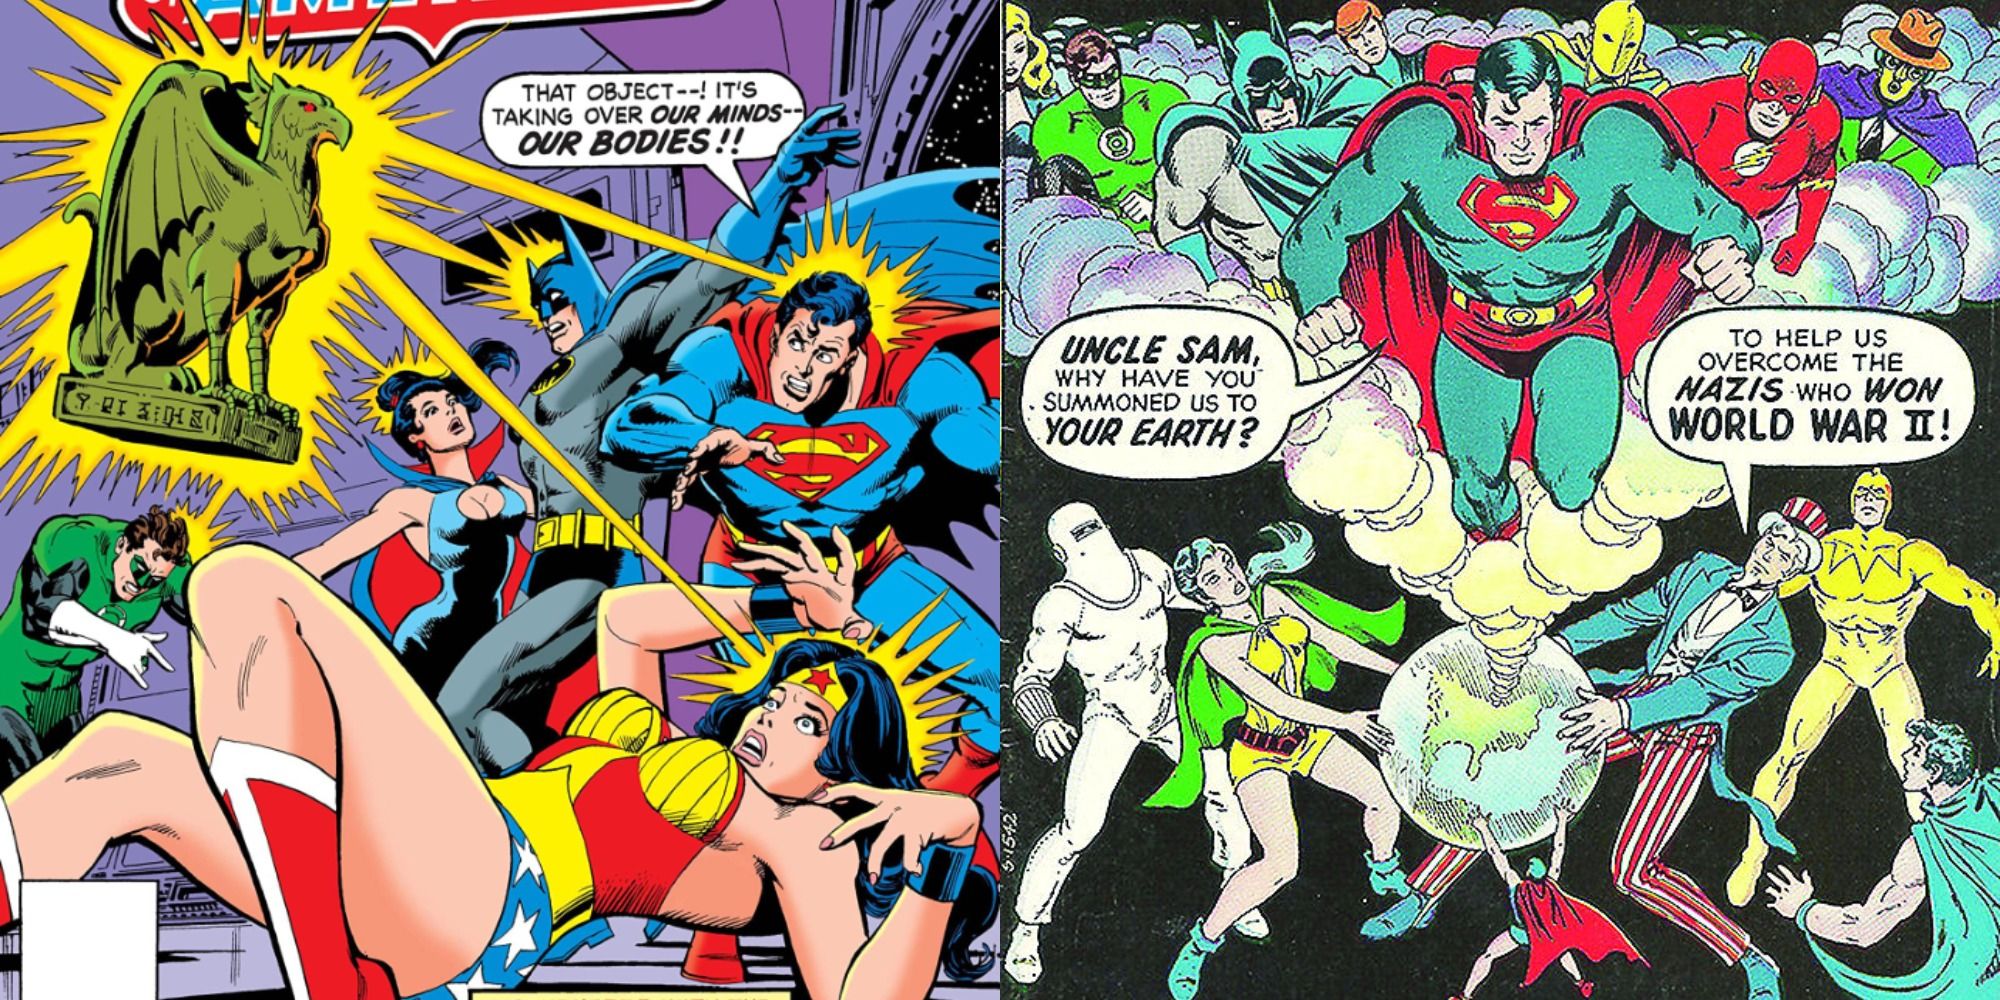 Split image showing covers for Justice League #166 and Justice League #107